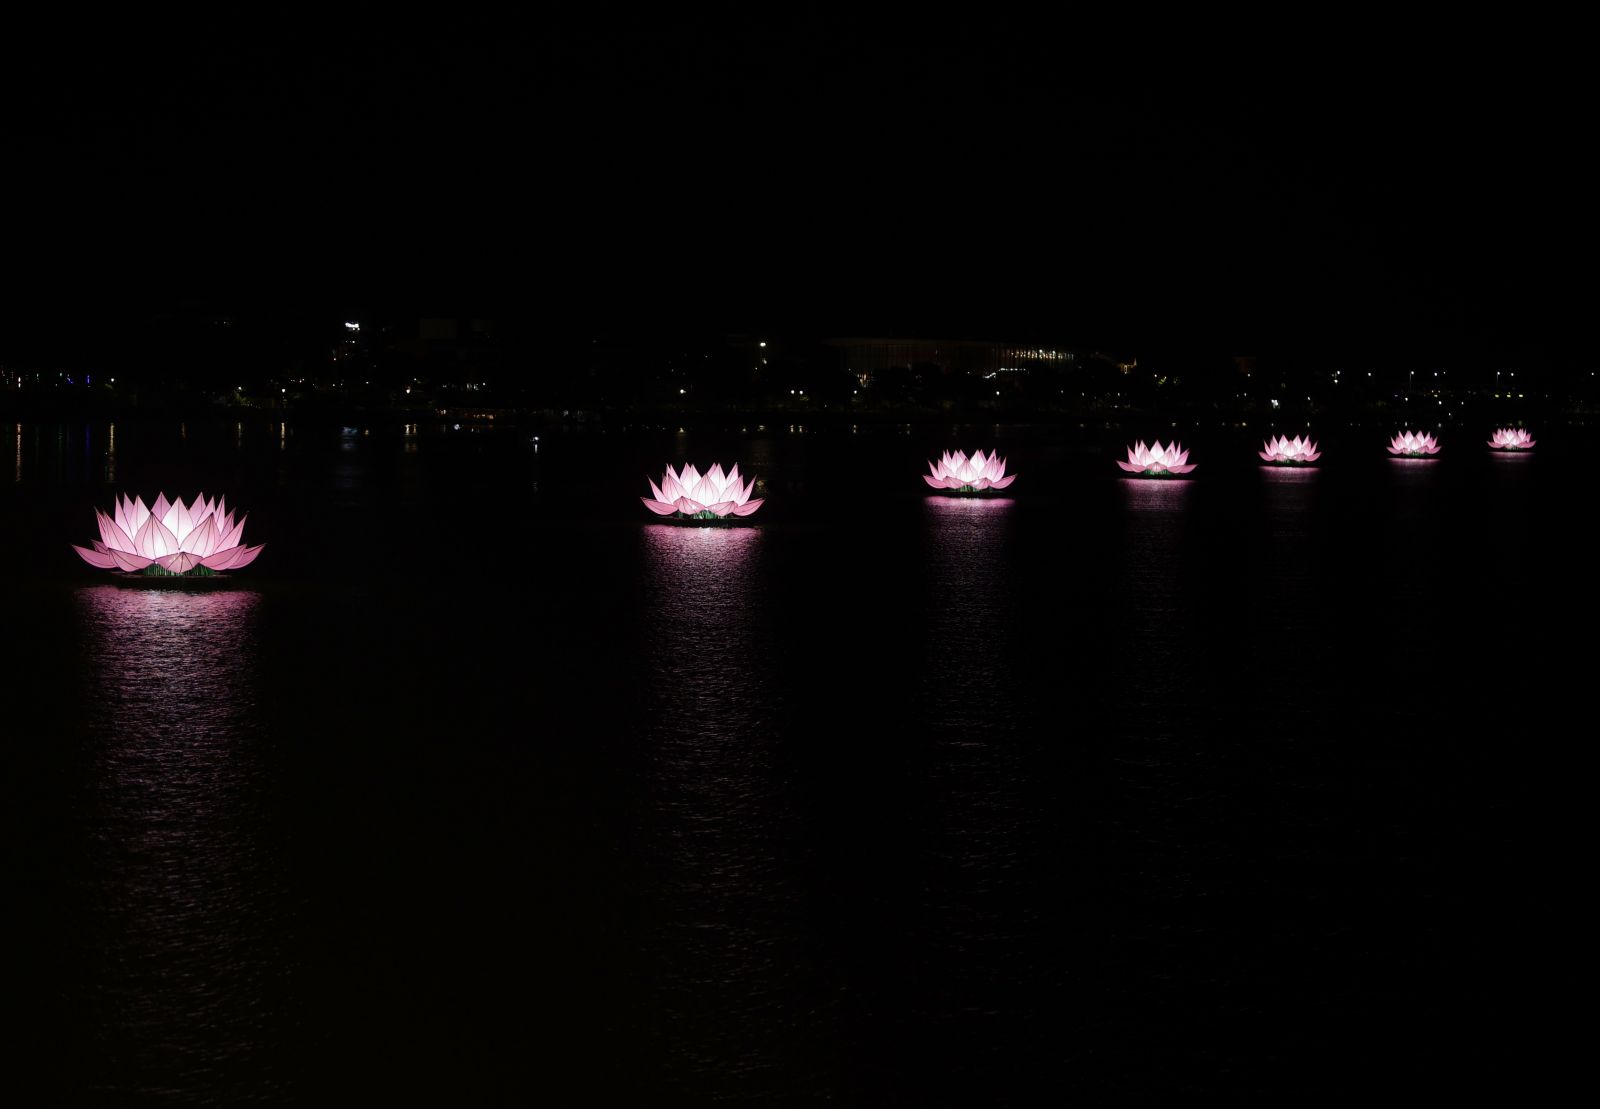 The 7 lotus flowers are lit on the Perfume River